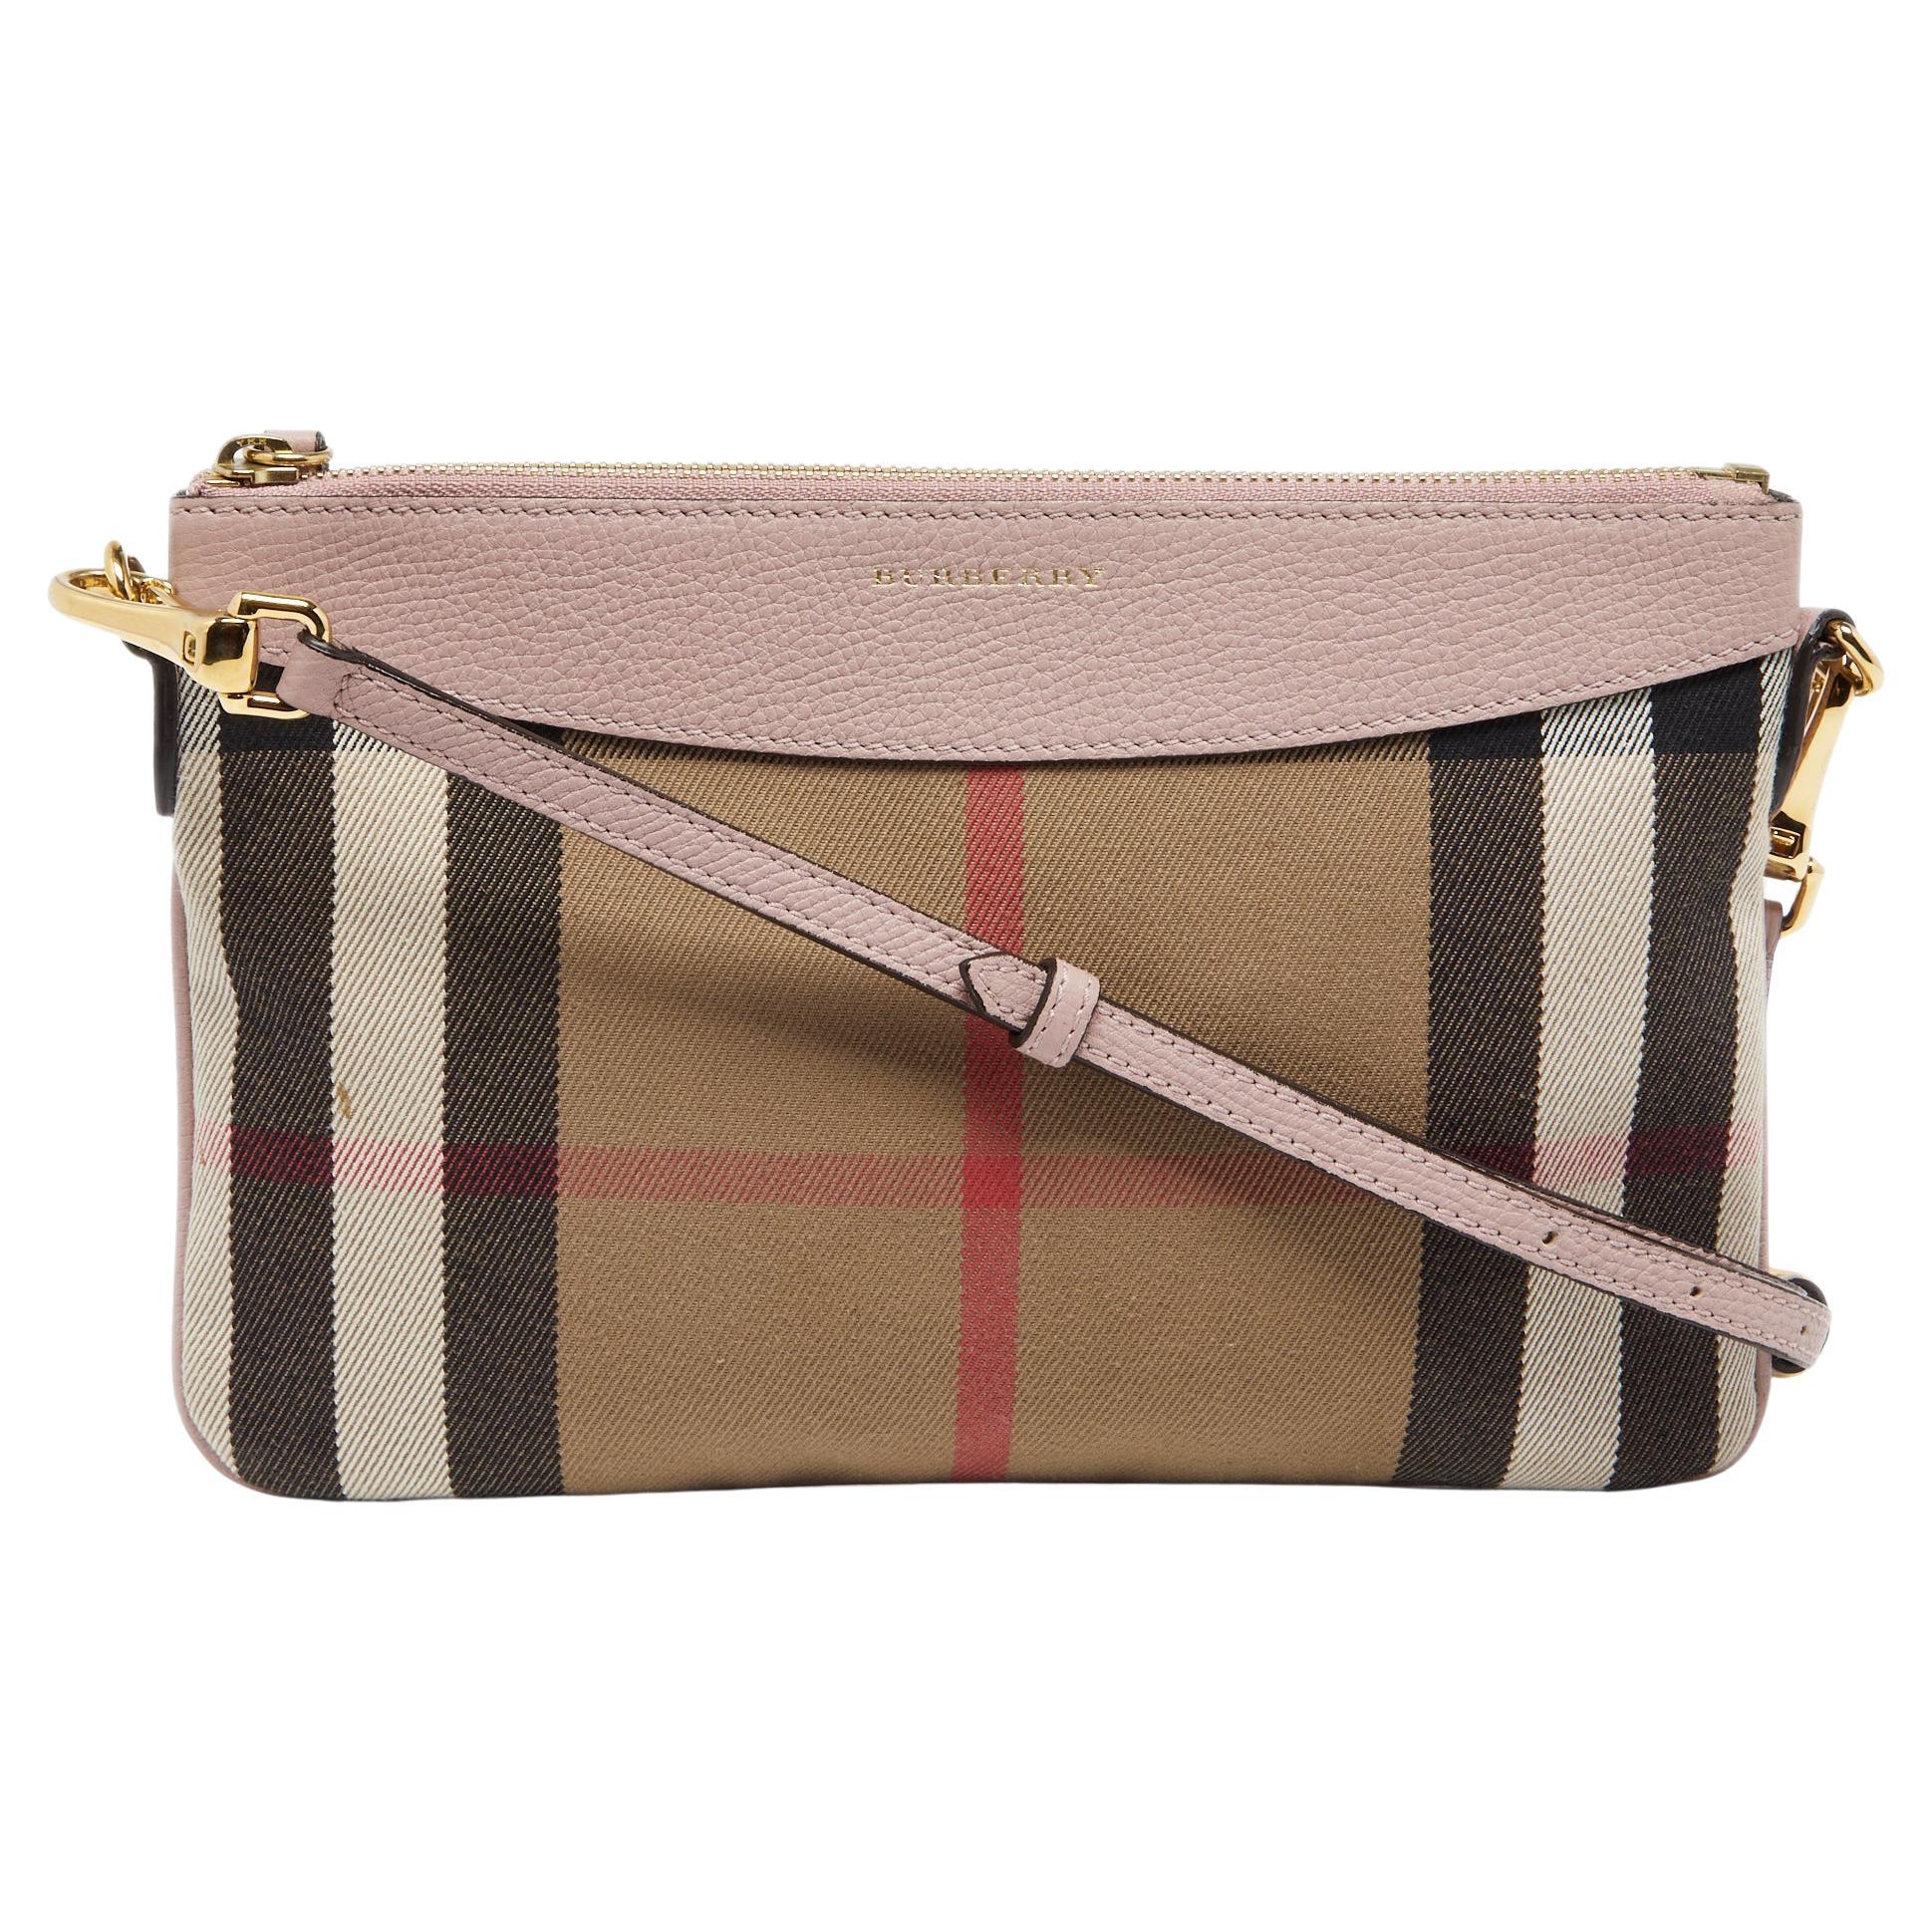 Burberry Pink/Beige House Check Canvas and Leather Peyton Crossbody Bag